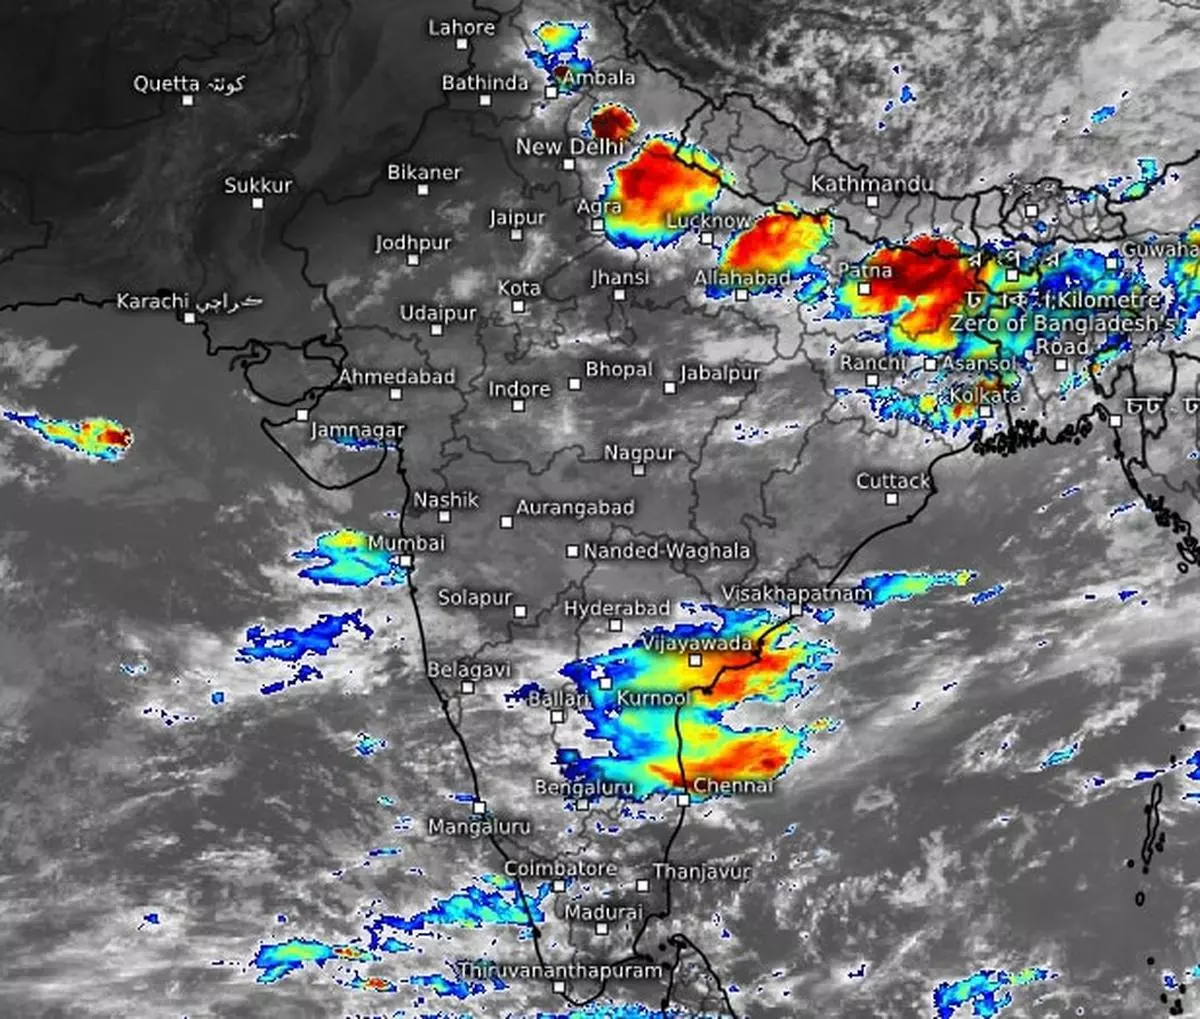 Blobs of heavy thunderstorms lined up the foothills of the Himalayas in West Bengal, Bihar and Uttar Pradesh on Tuesday morning while some showed up over the Andhra Pradesh coast and the adjacent Rayalaseema region. 